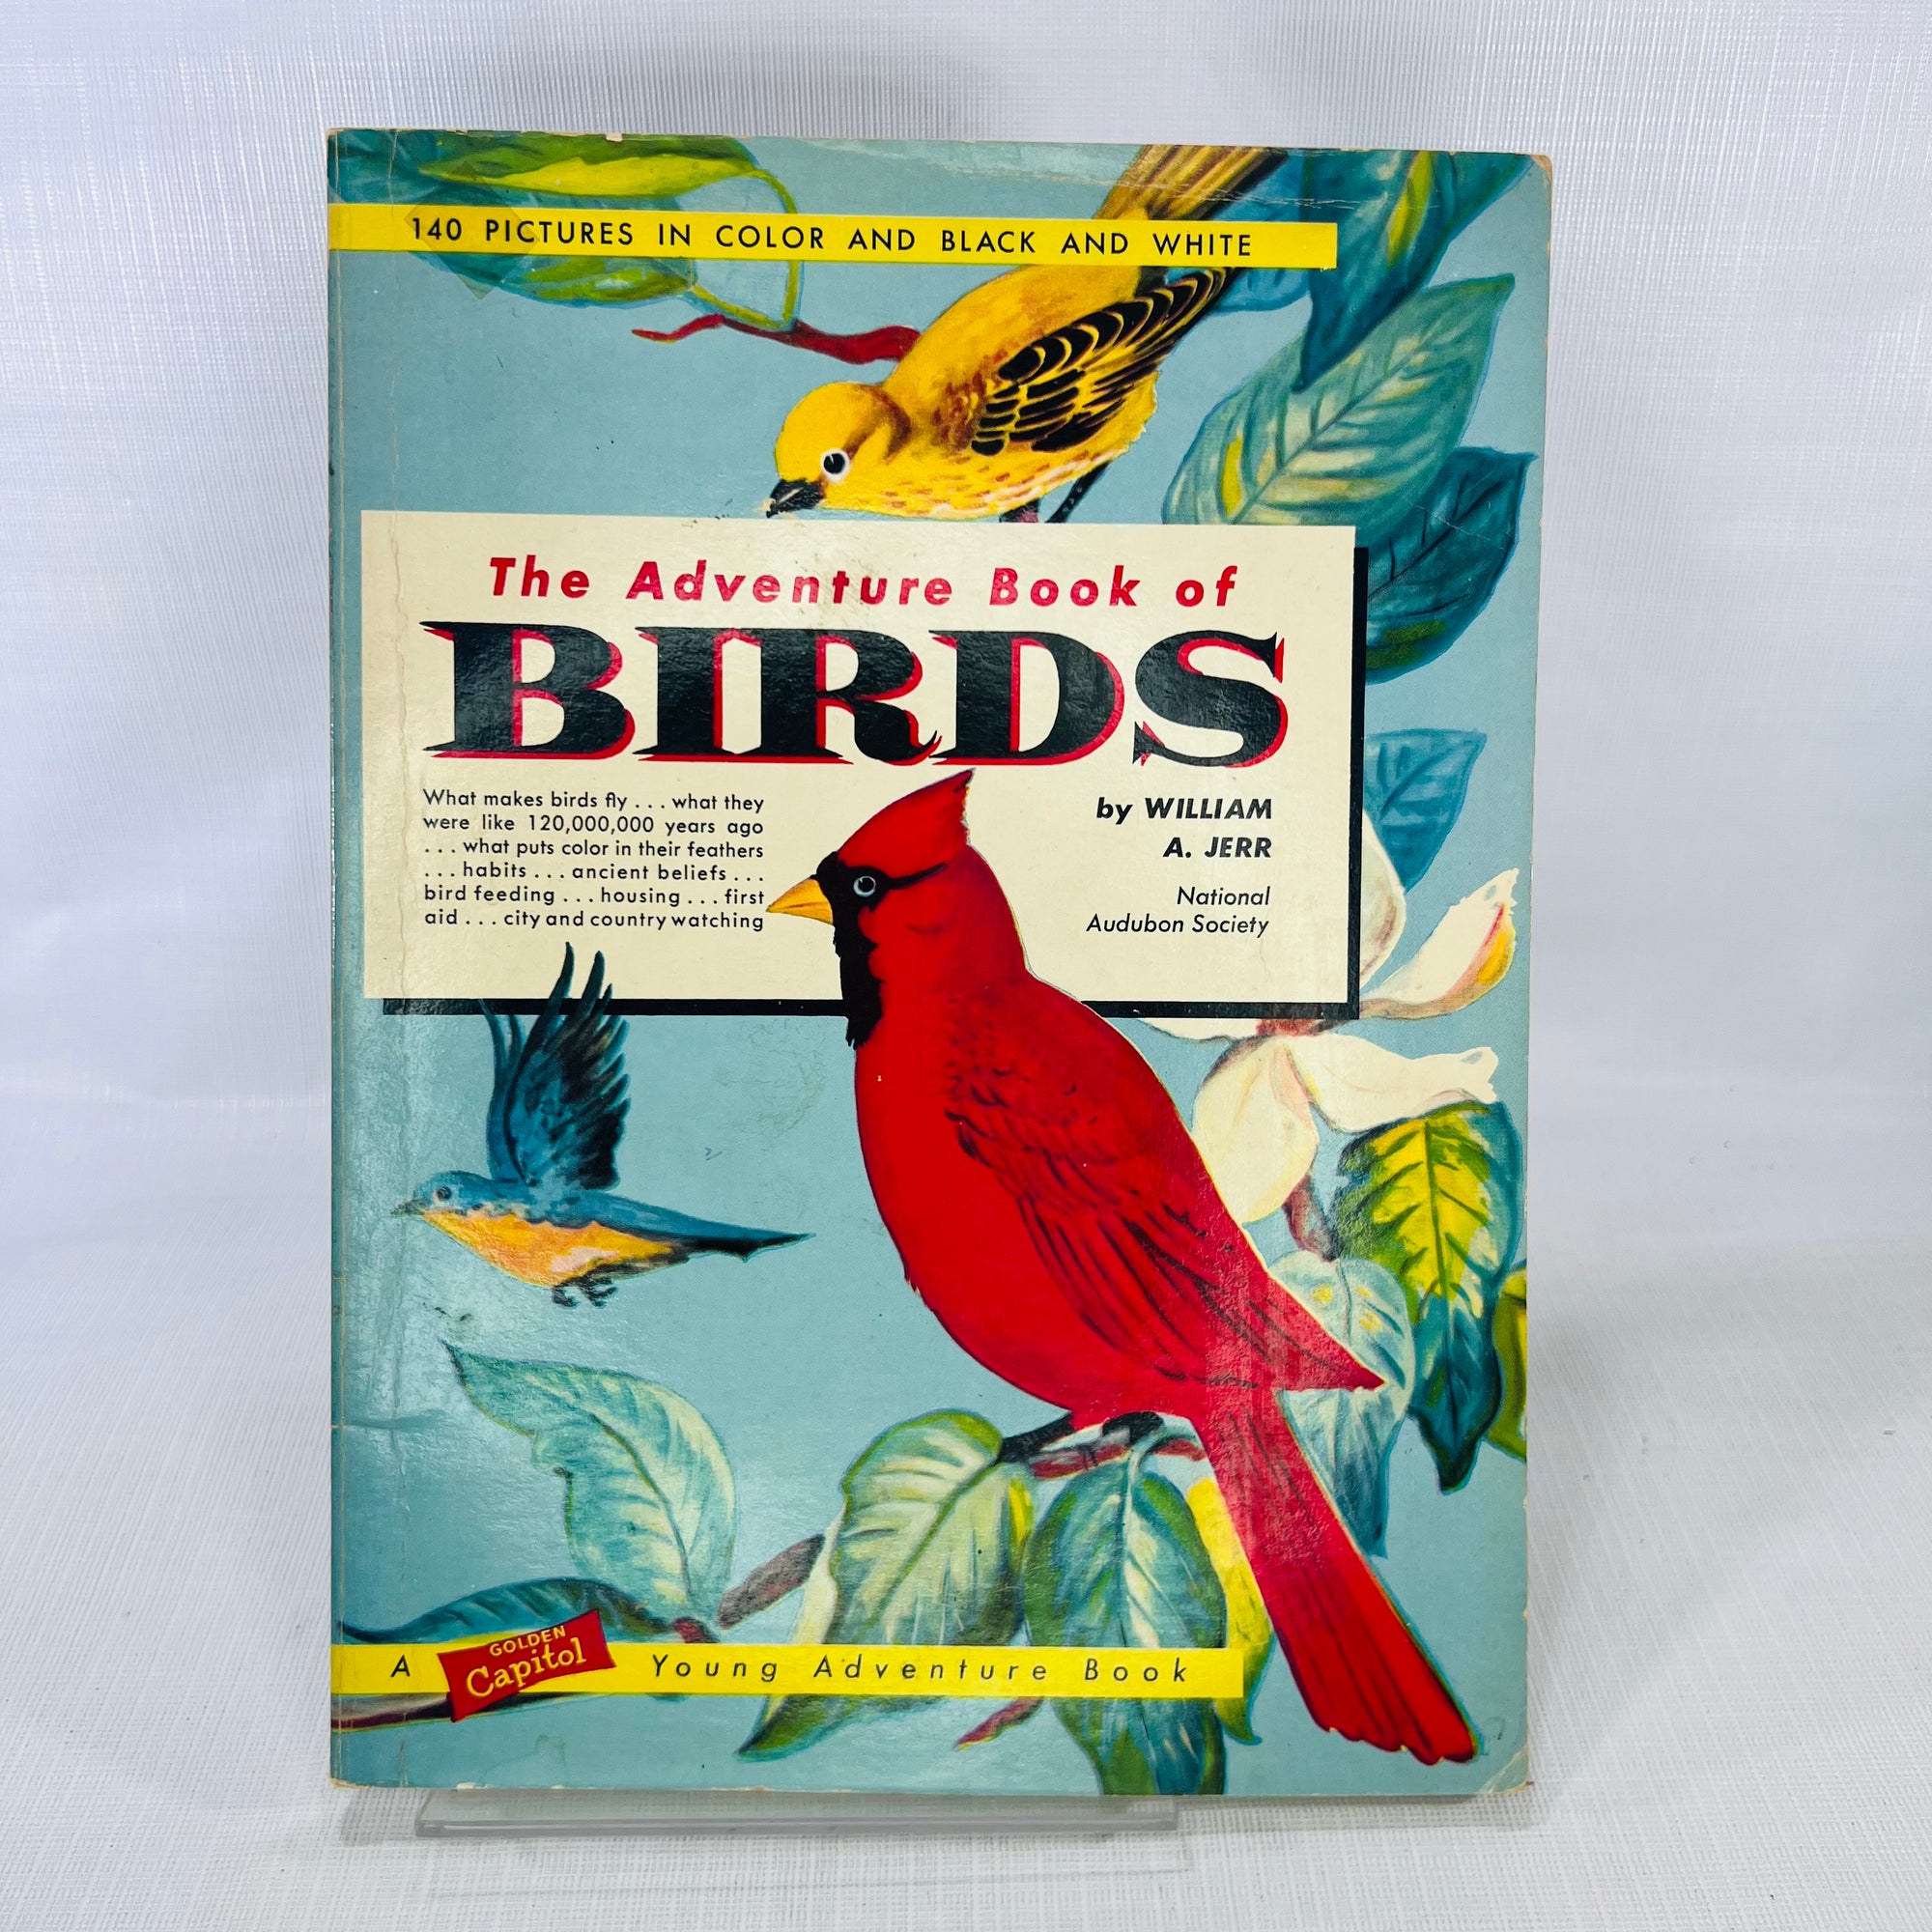 The Adventure Book of Birds by William A. Jerr illustrations by Charlotte Howard 1959 A Capitol Young Adventure Book